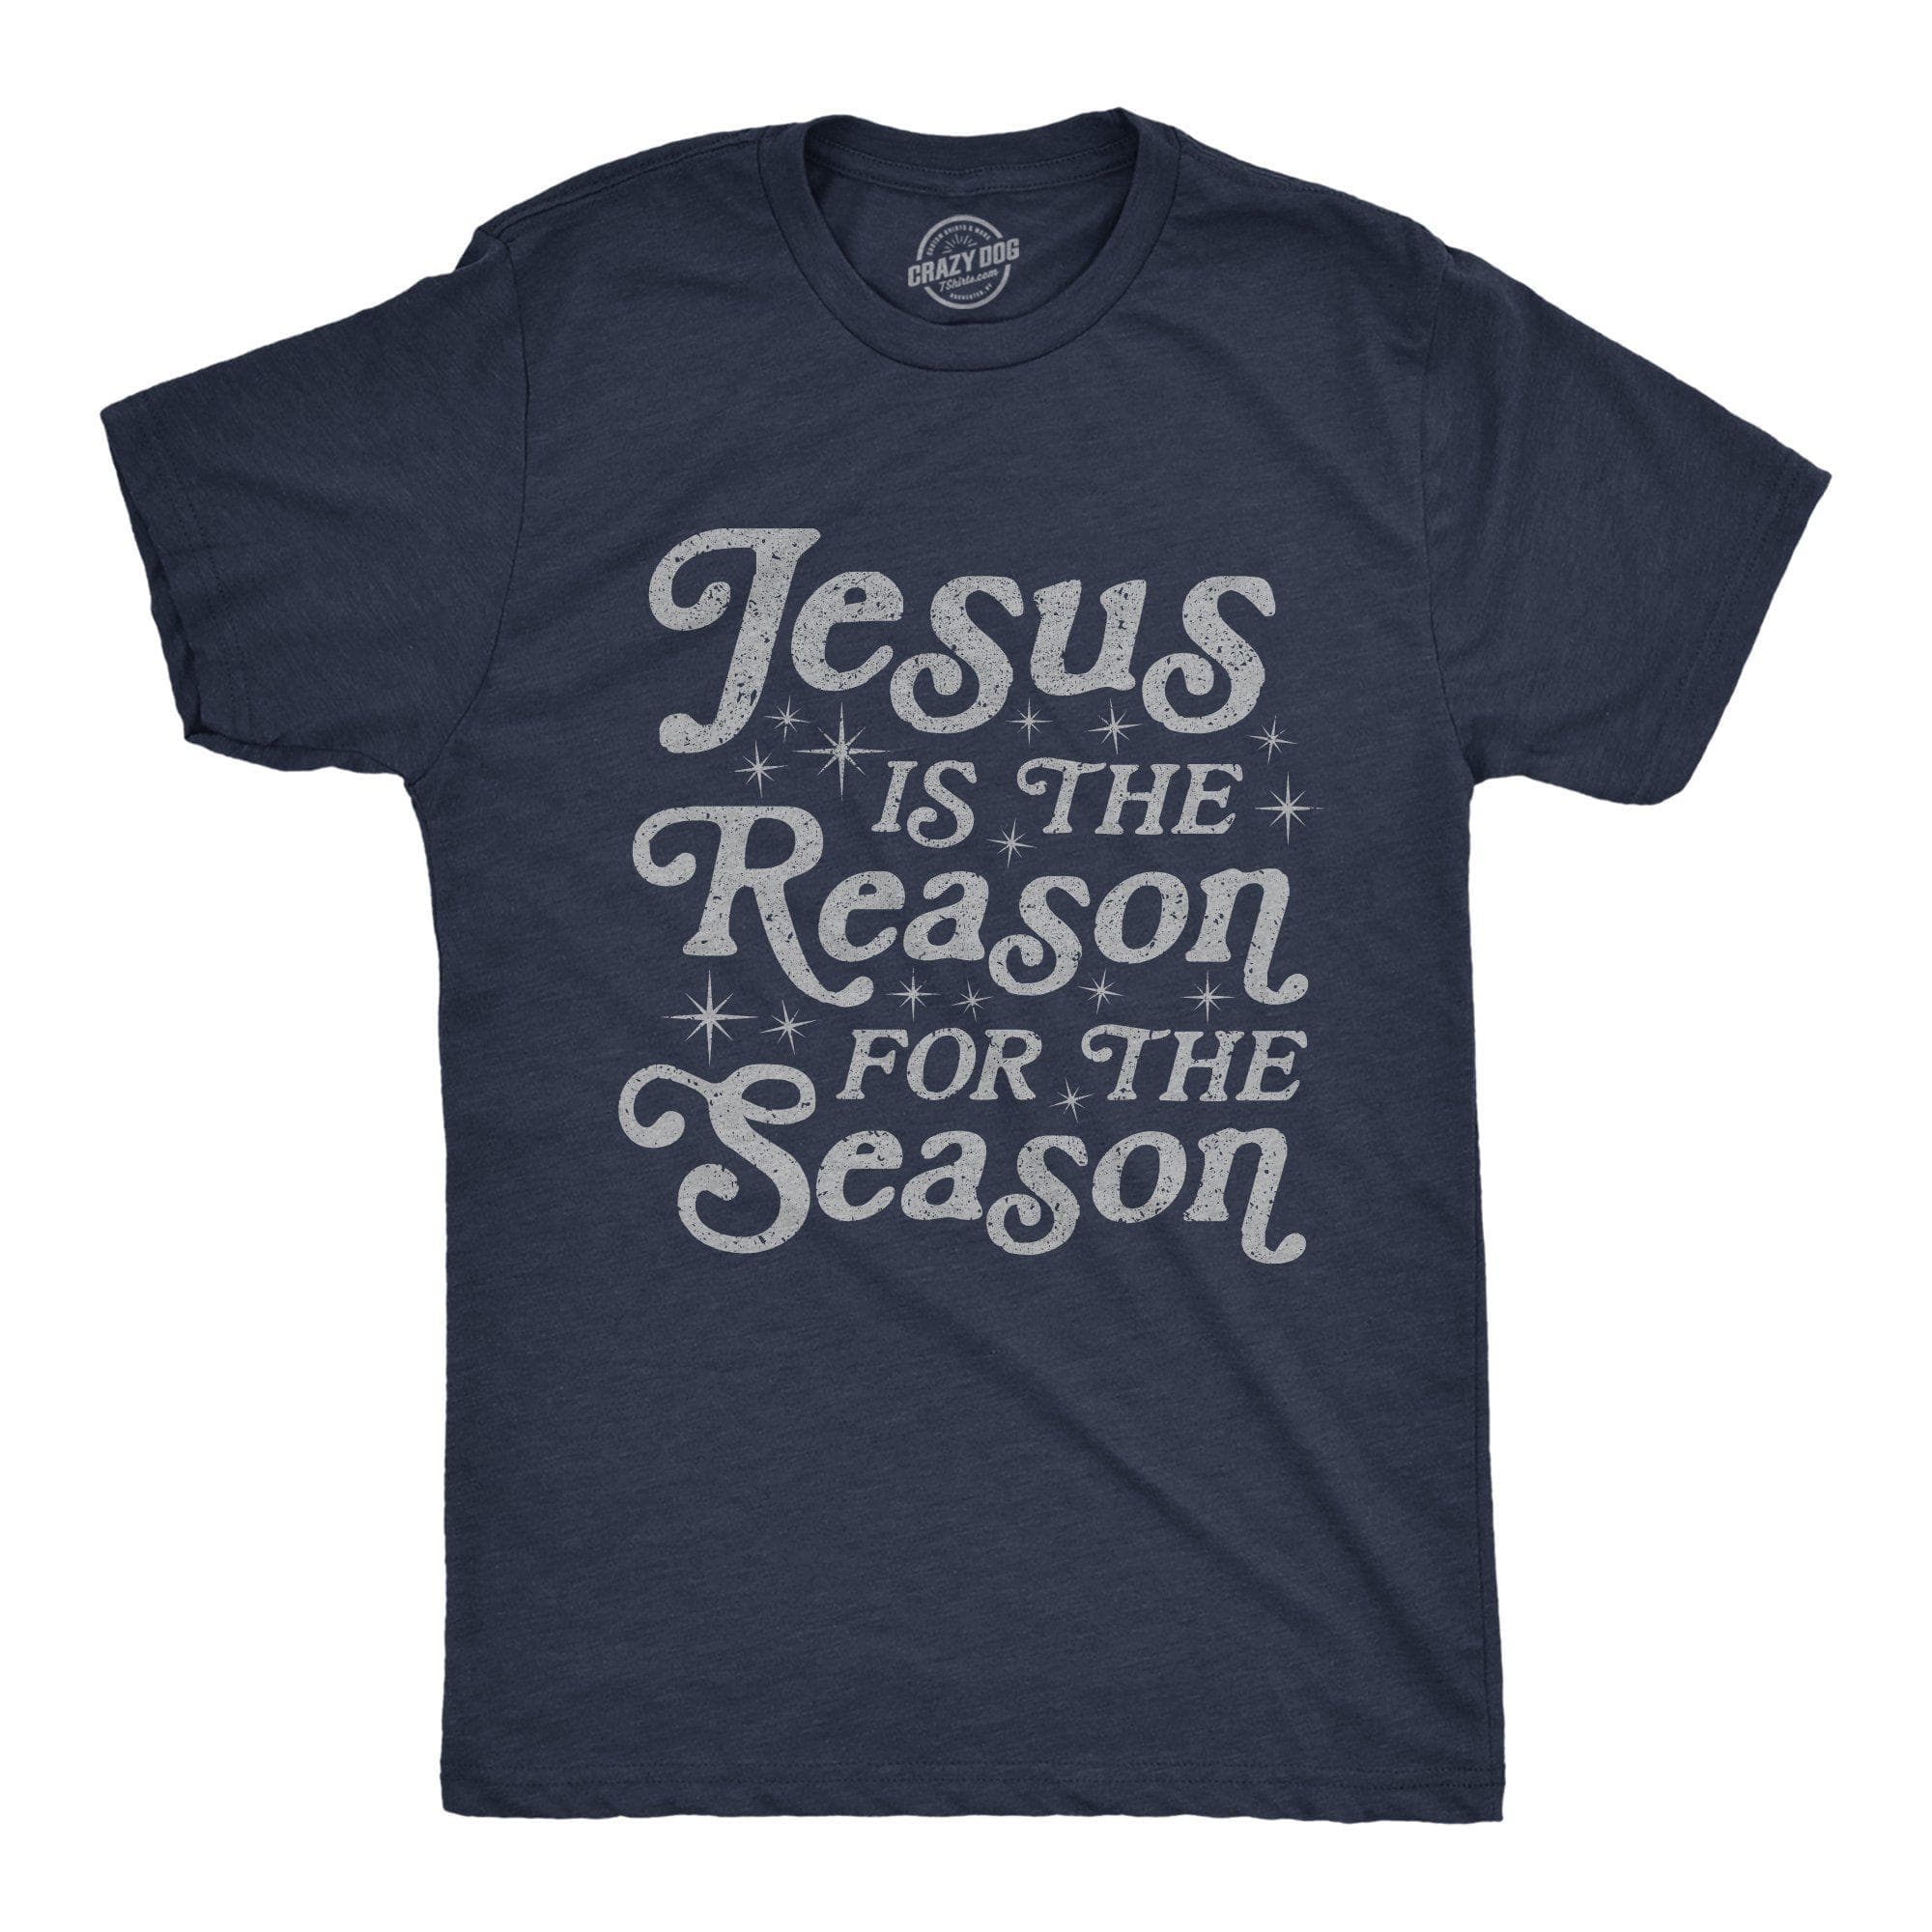 Jesus Is The Reason For The Season Men's Tshirt - Crazy Dog T-Shirts